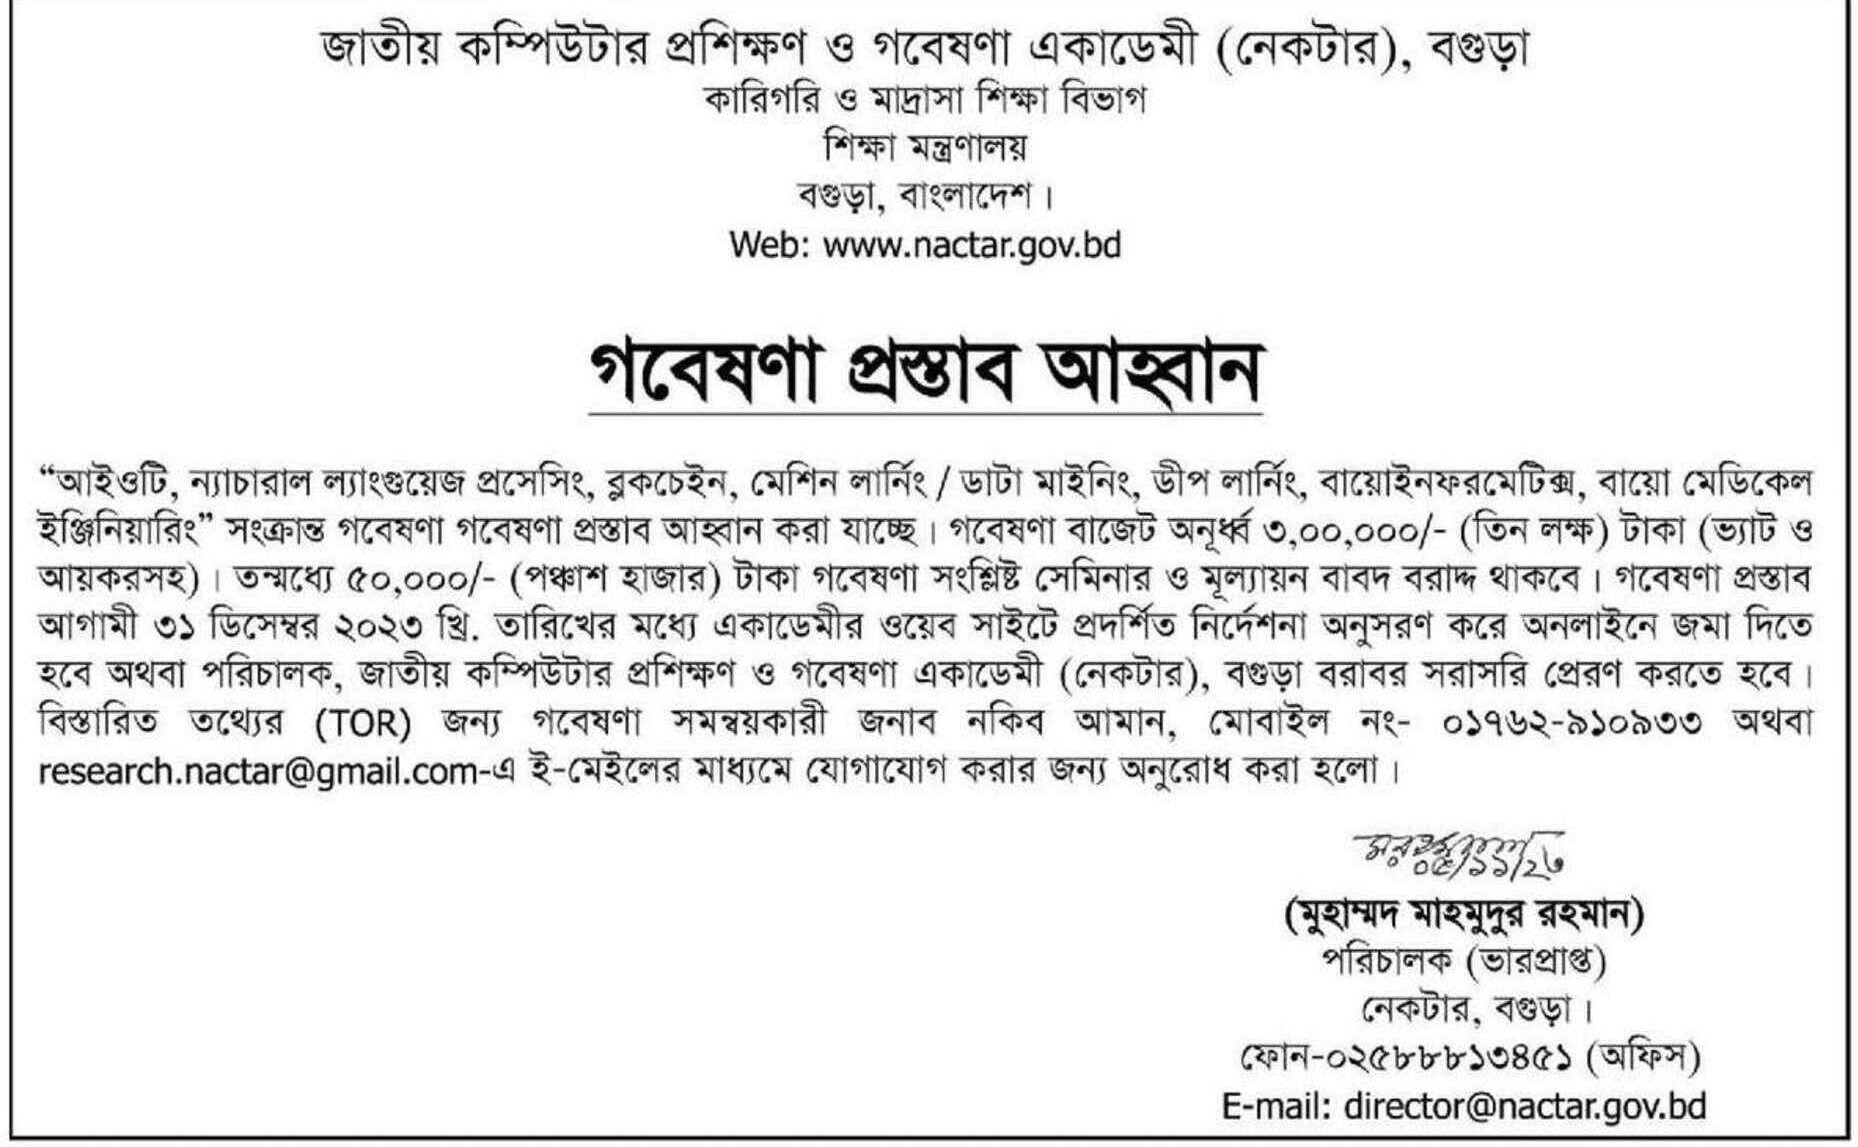 Research Grant in Bangladesh